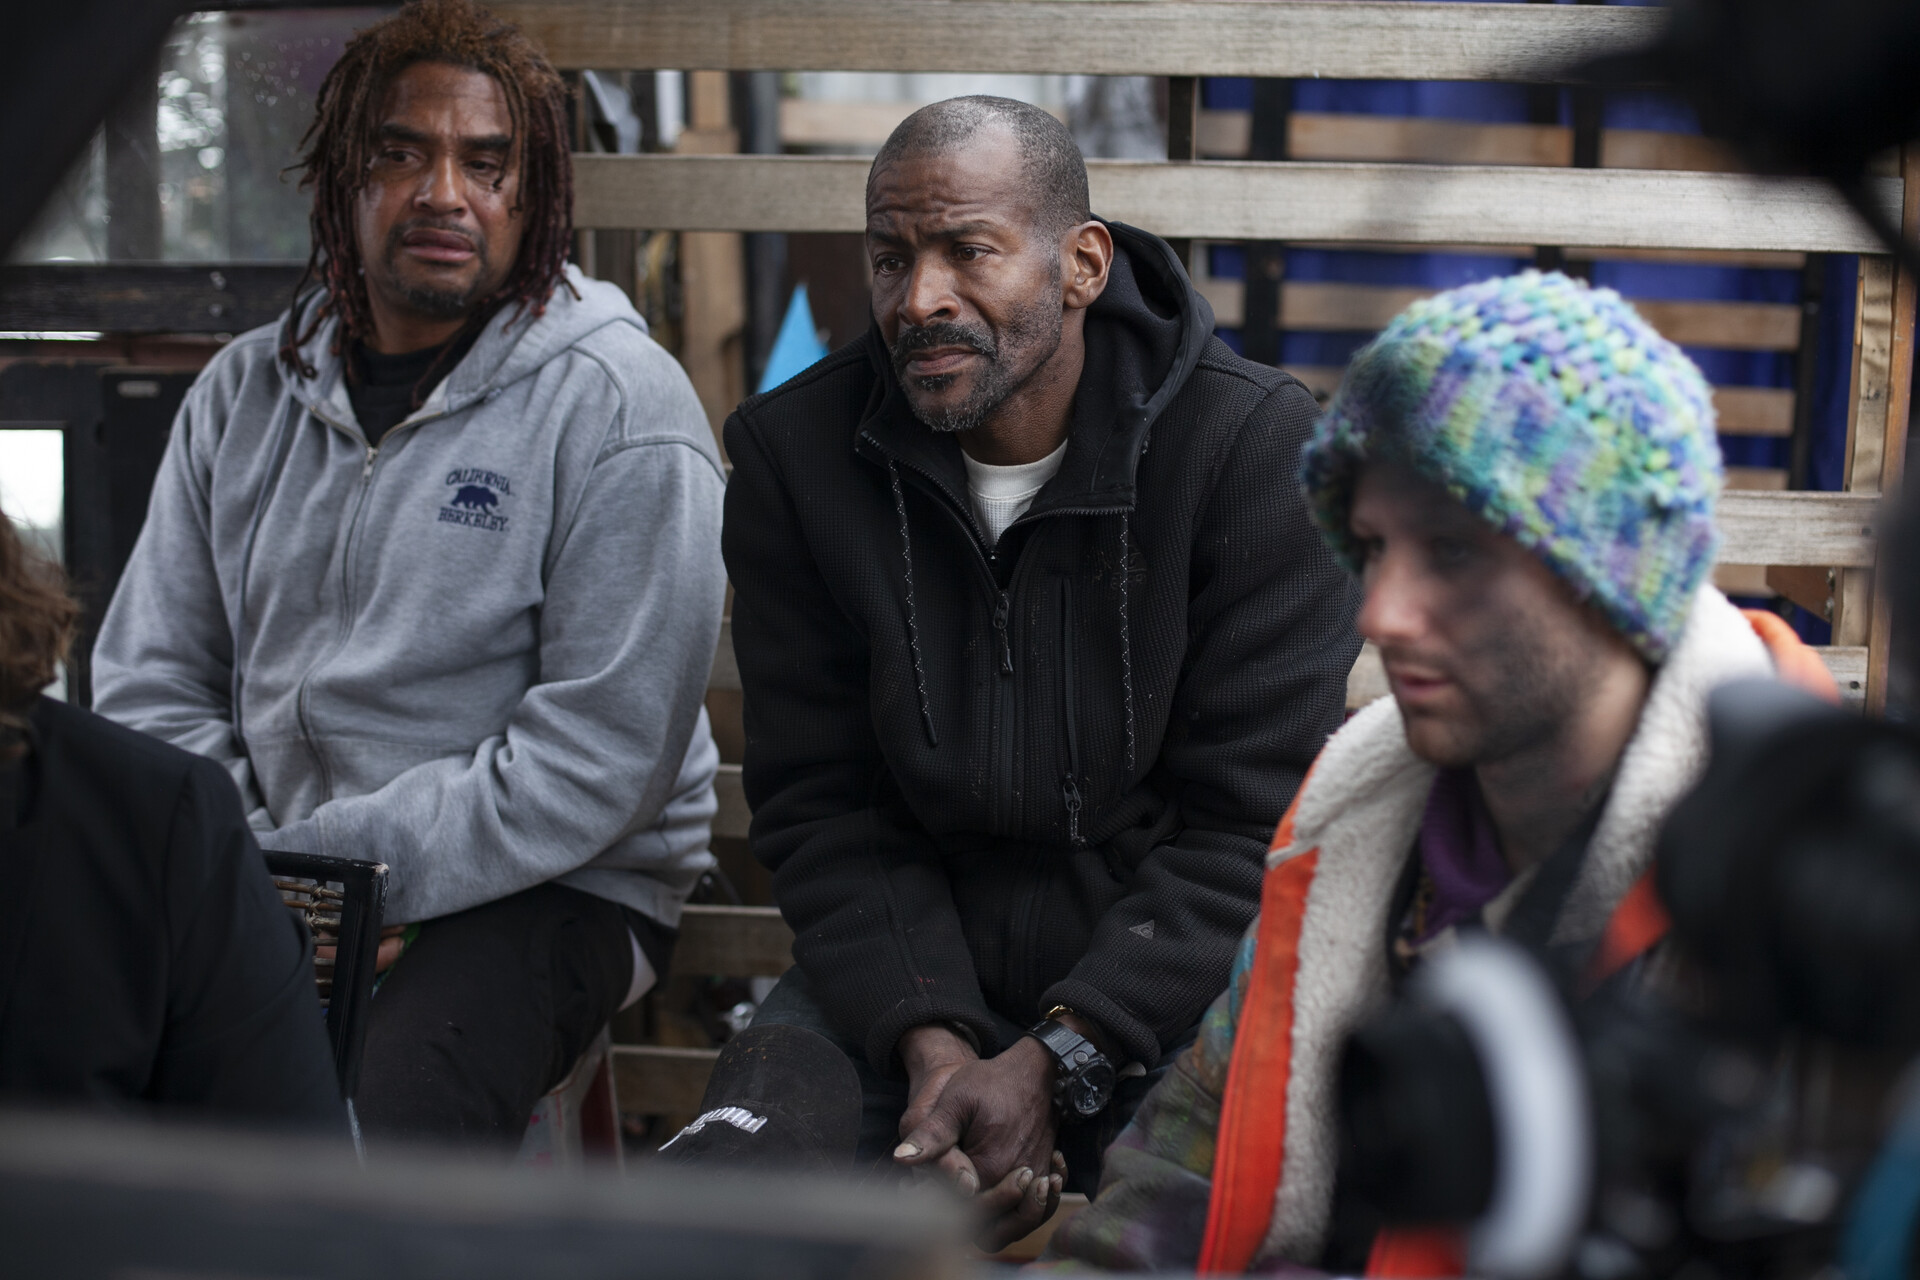 Three people with concerned expressions sit together listening: a Black man with dreads wearing a gray hoodie sits next to a Black man wearing a black hoodie, and a white man wearing a multicolored beanie